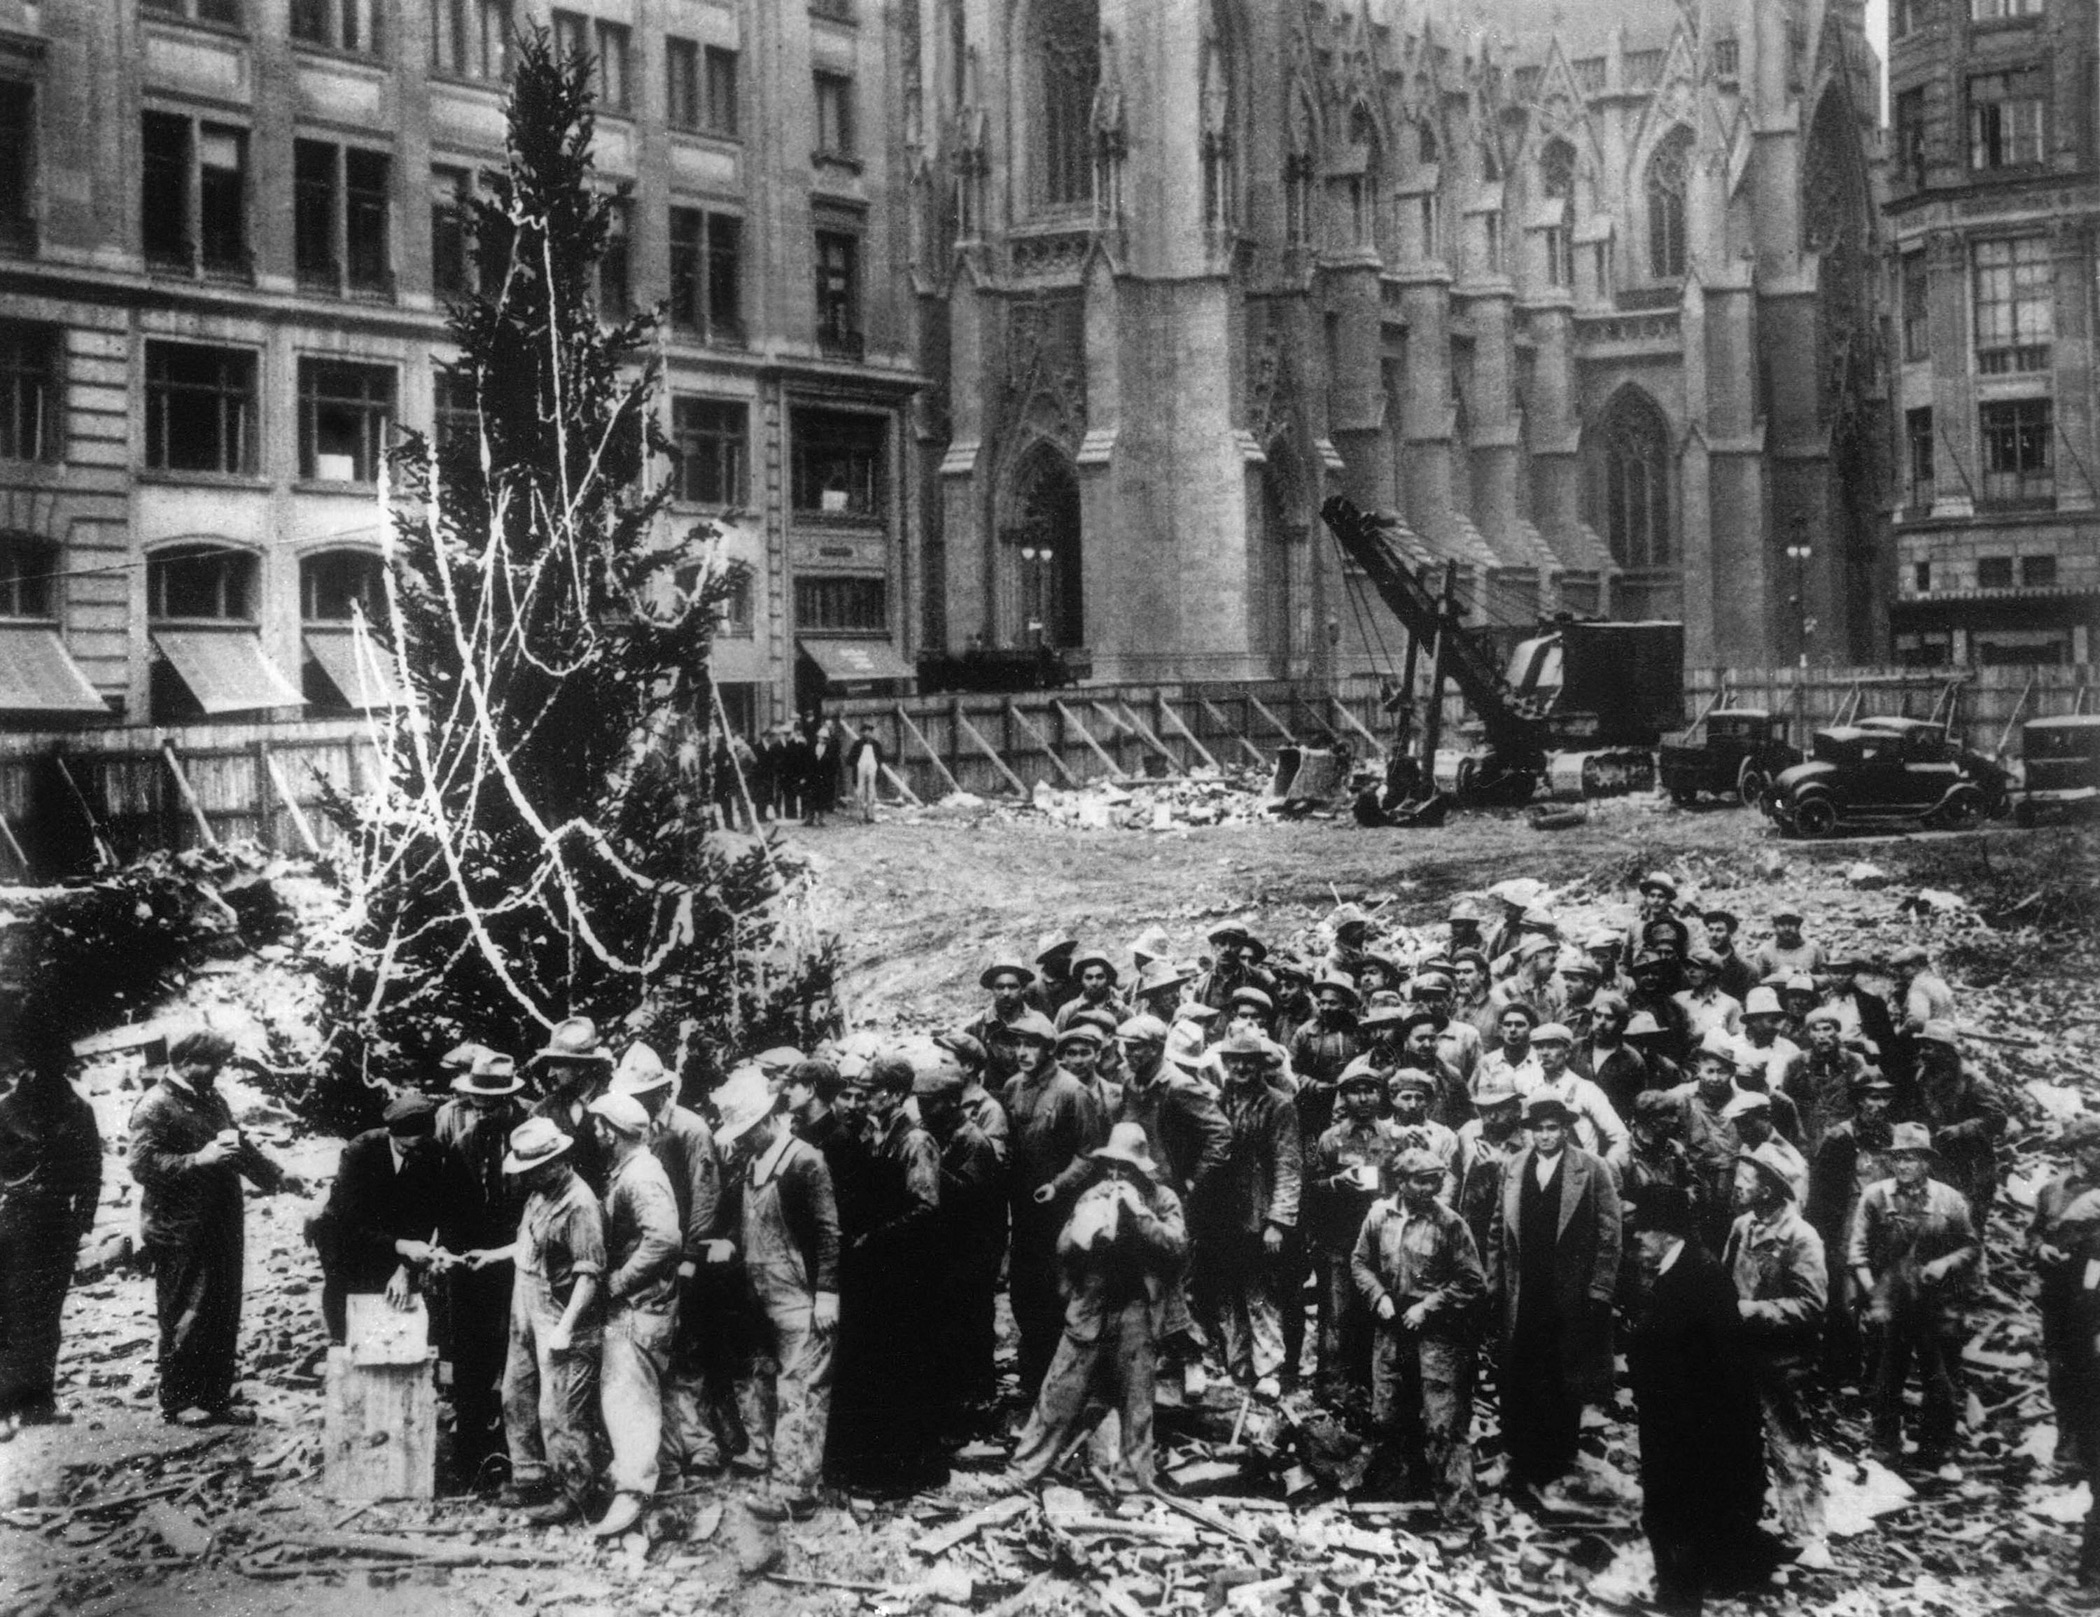 Construction workers line up for pay beside the first Rockefeller Center Christmas tree in New York, 1931. The Christmas tree went on to become an annual tradition and a New York landmark. St. Patrick's Cathedral is visible in the background on Fifth Avenue.